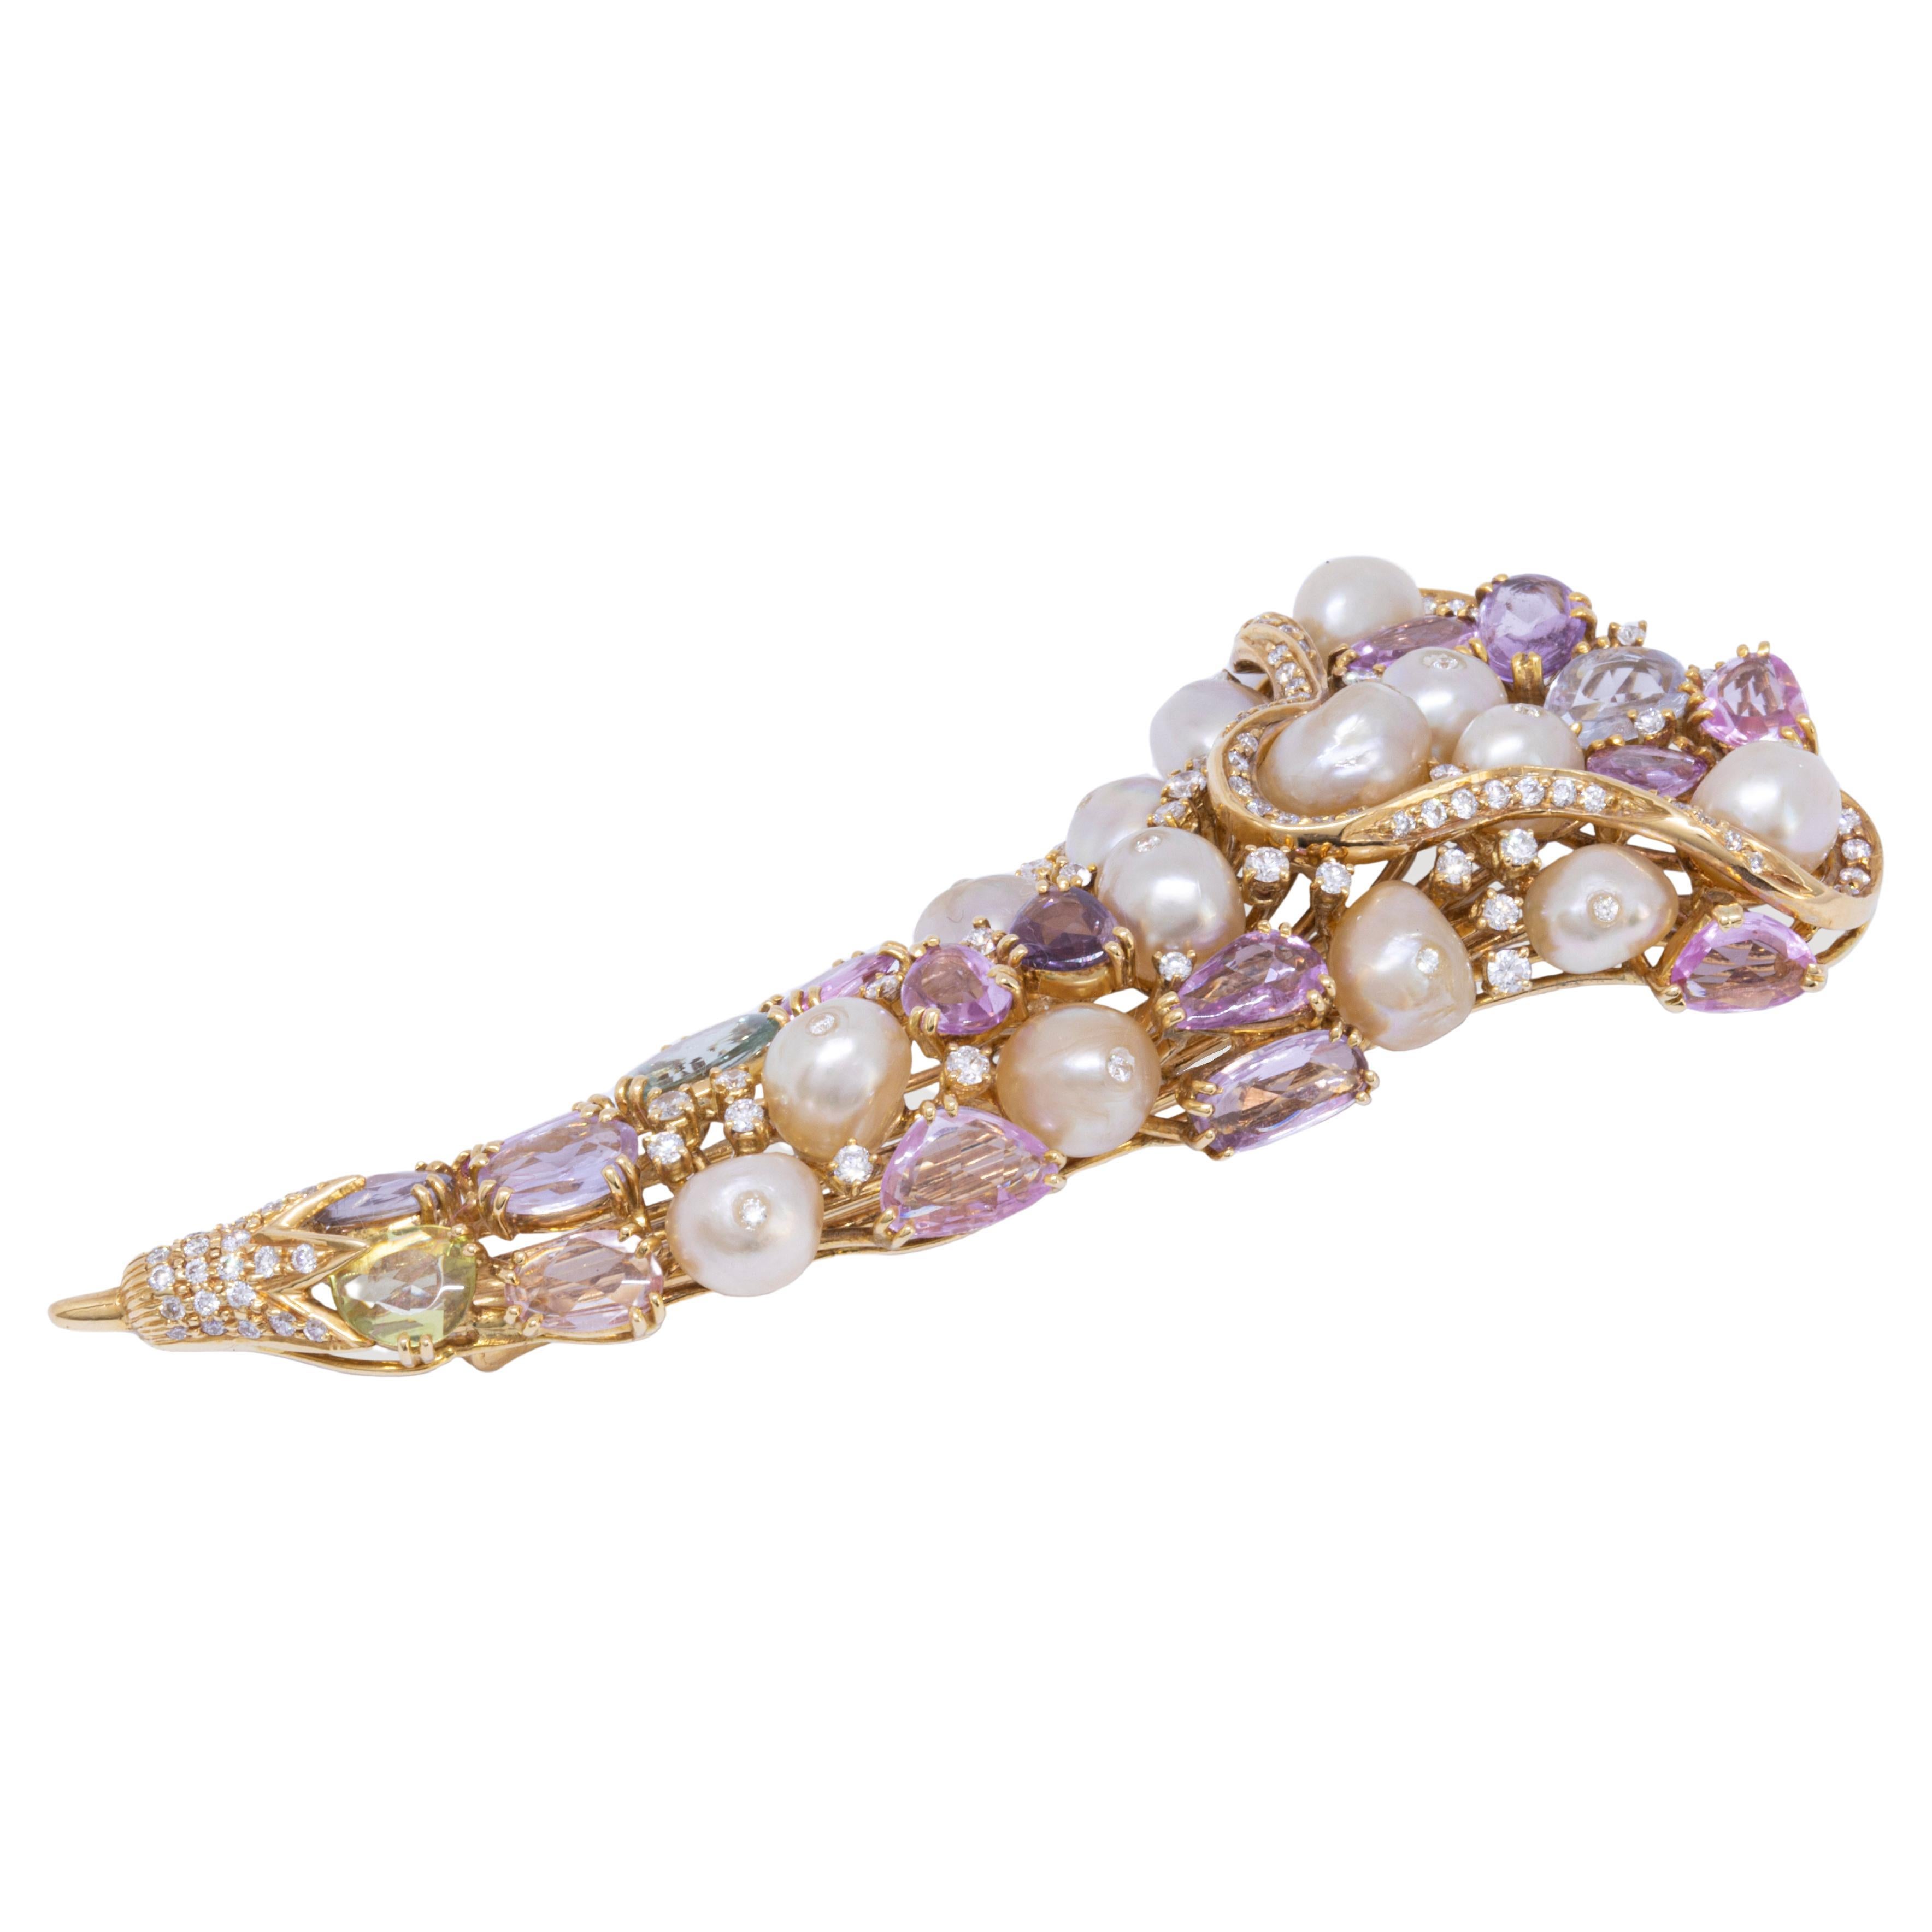 An eye catching cluster of baroque natural pearls, multiple color rose cut sapphires and diamonds.
The gemstones come together to form a unique flower bouquet brooch. 
The natural flow of the 18k yellow gold, diamond studded border adds a beautiful